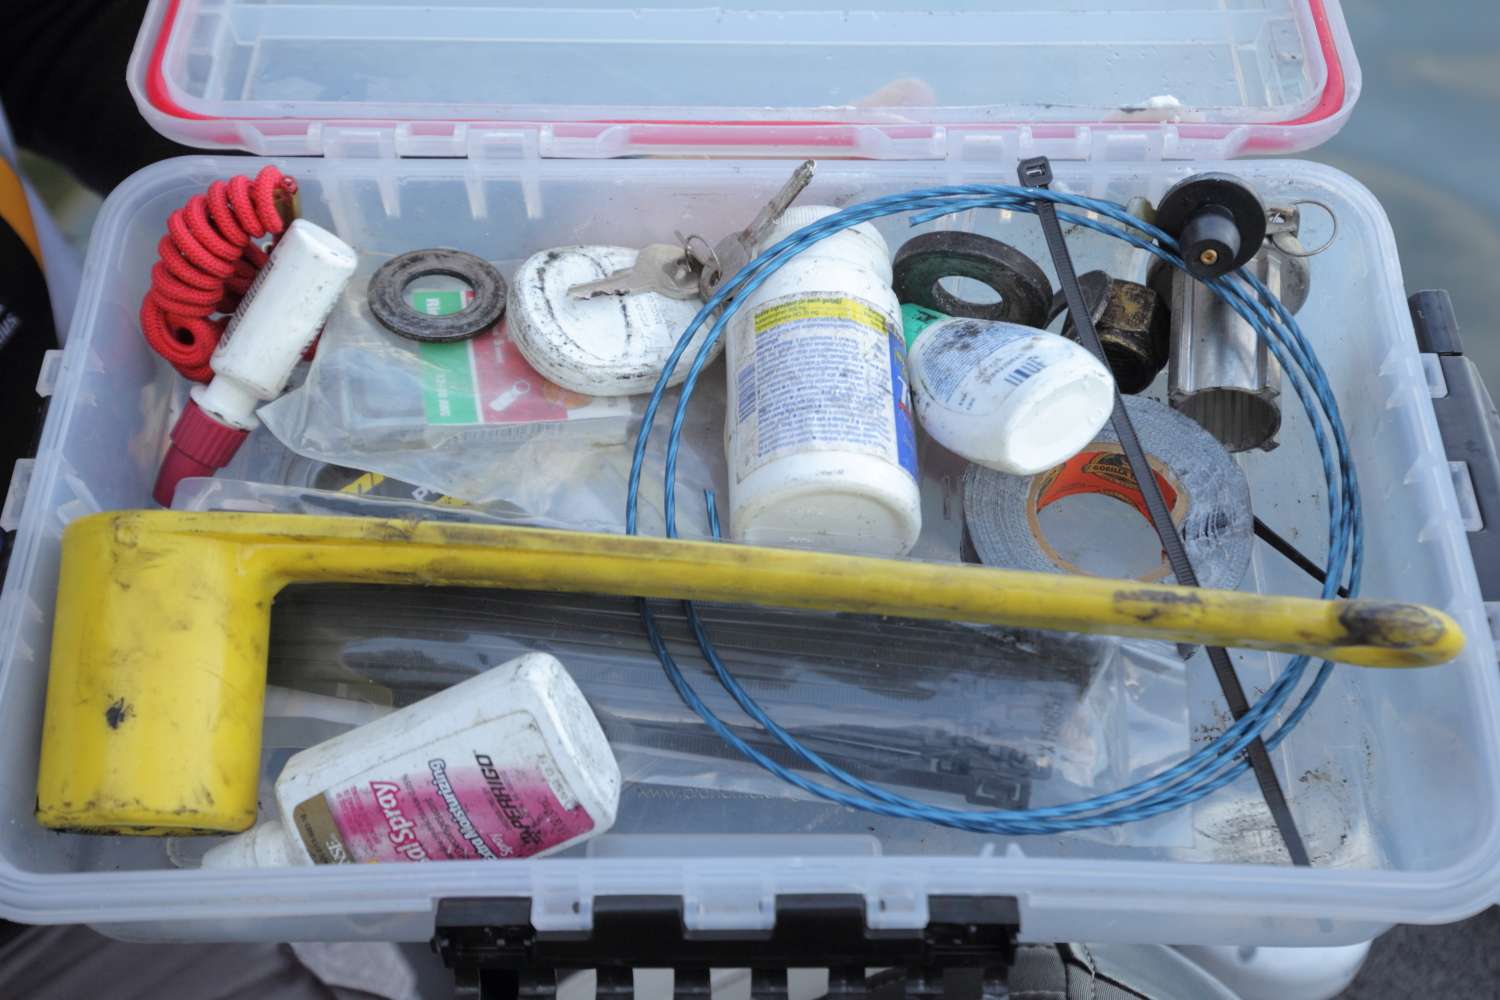 Lee said an angler must be prepared to fix anything and everything while on the water. The first Plano box stored in this compartment holds a prop wrench, zip ties, Power-Pole switches, extra drain plugs and electrical tape.